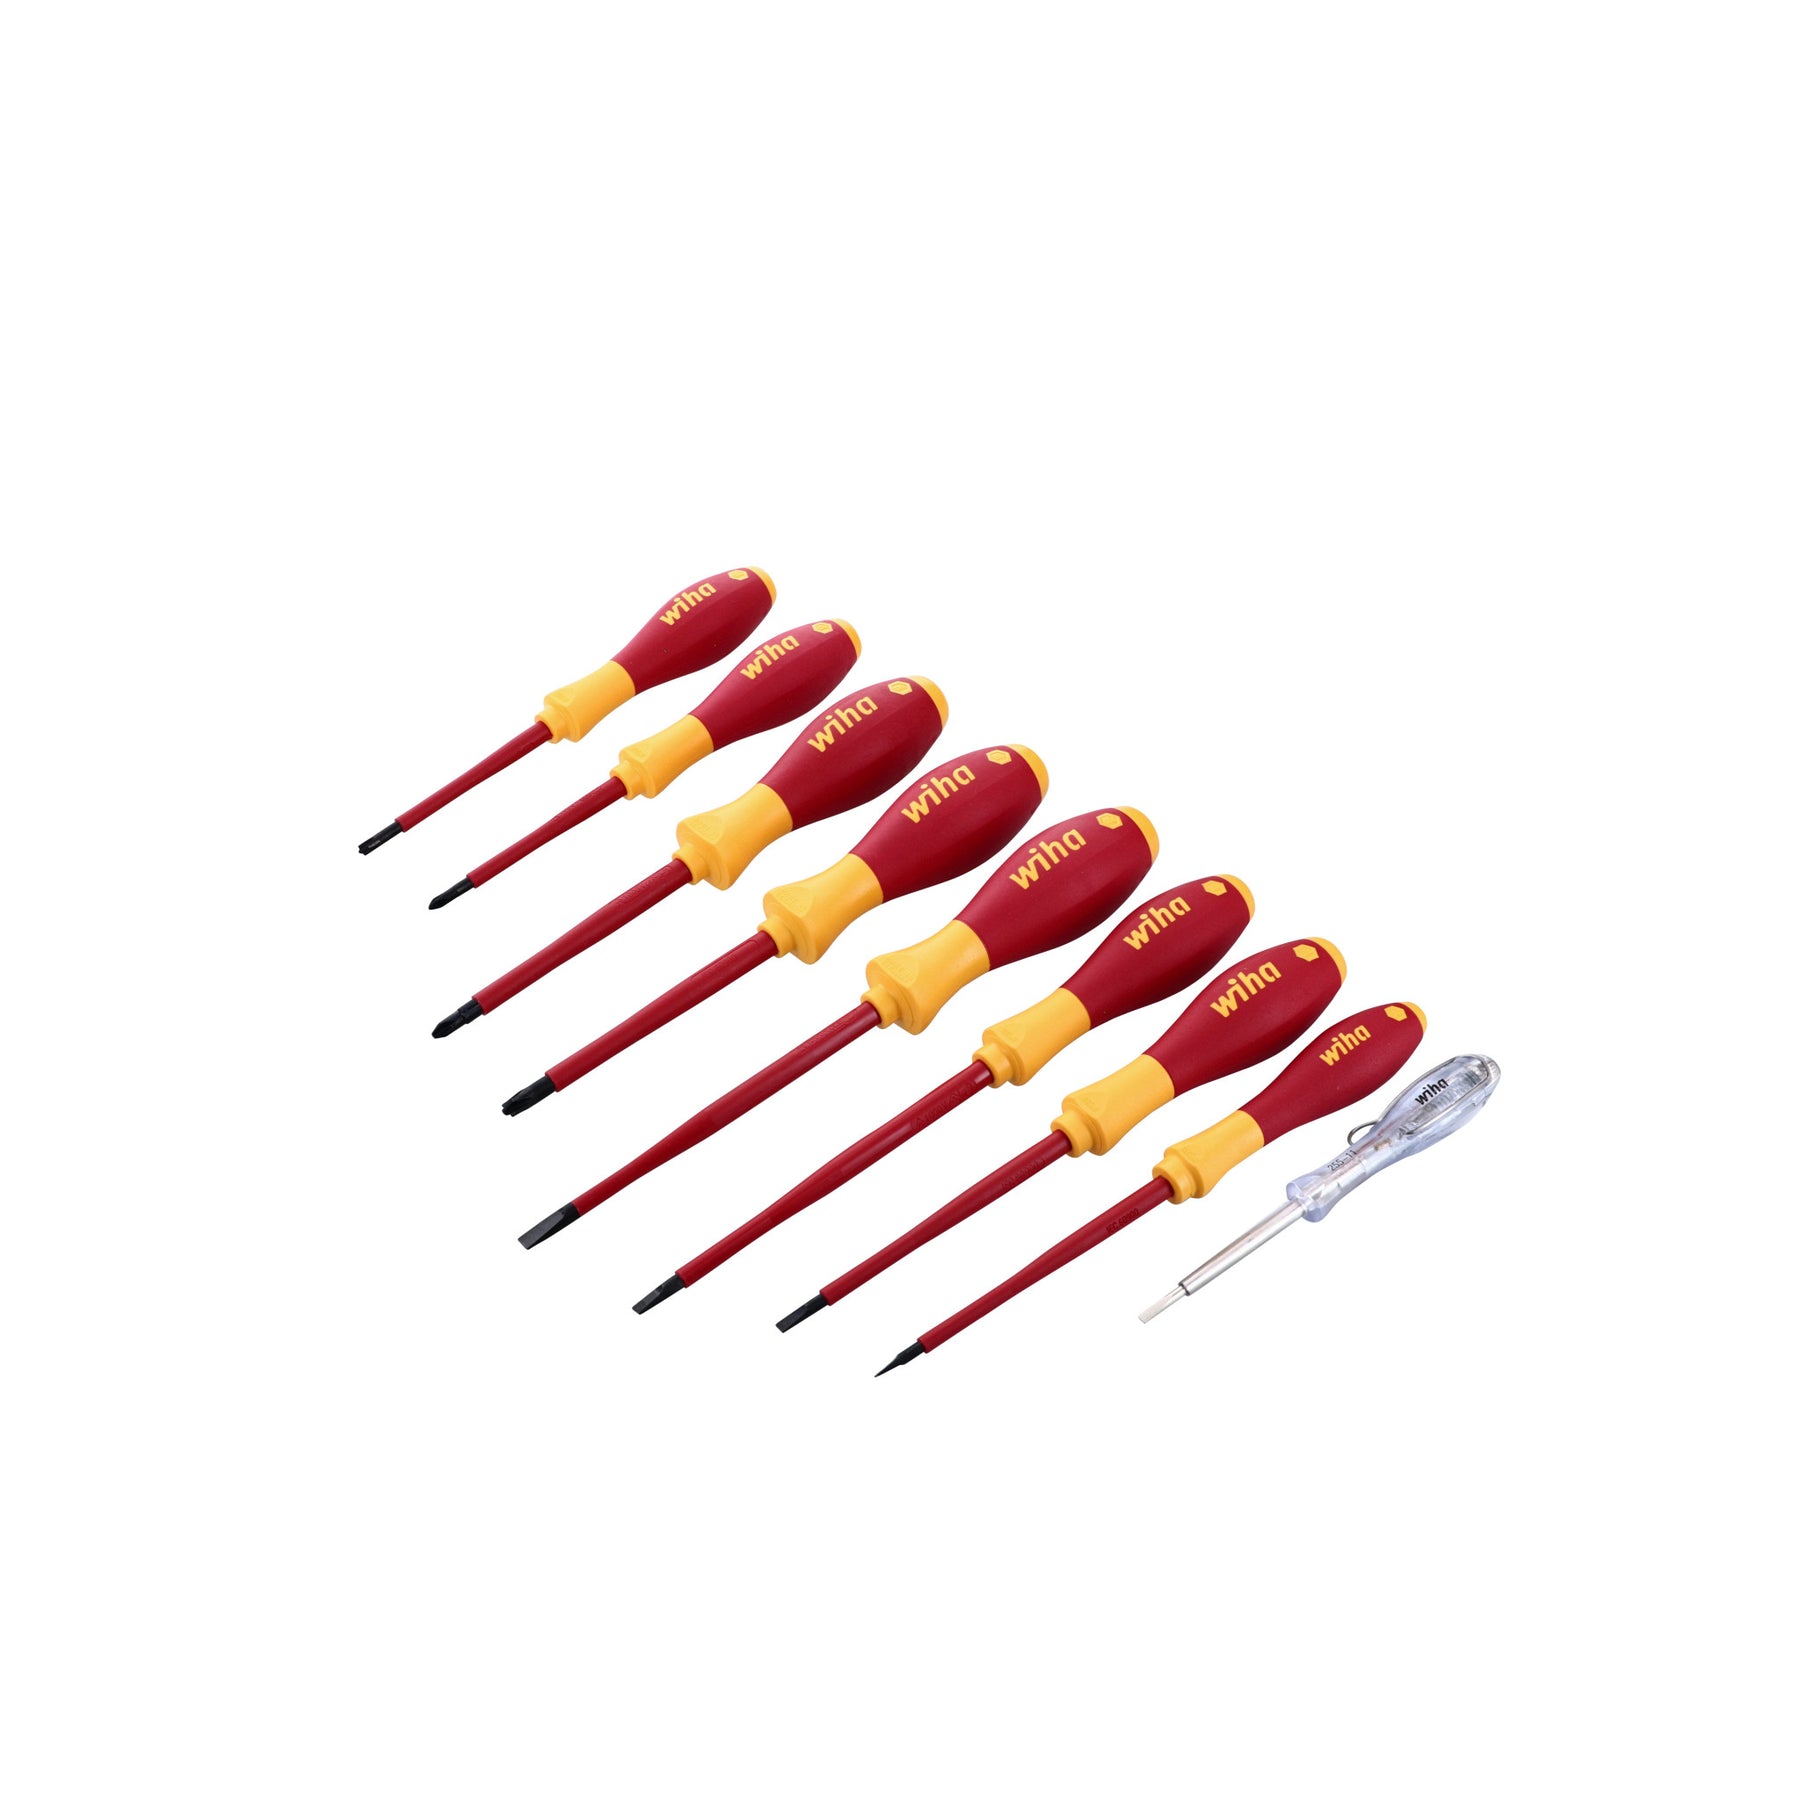 Wiha 32089 9 Piece Insulated SoftFinish Screwdriver and Voltage Detector Set